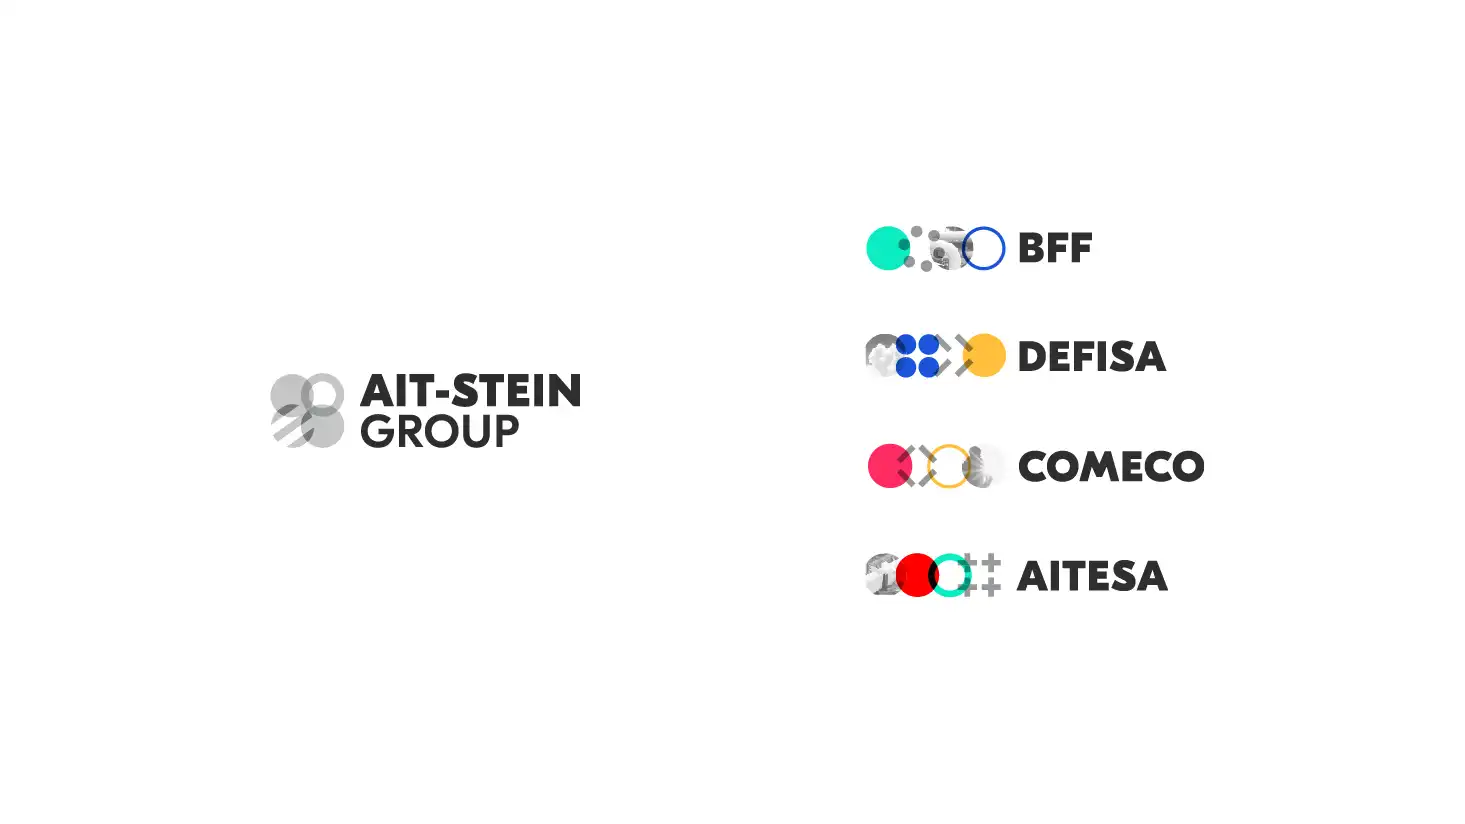 hierarchy between the group's logo and the sub-brand's logos for AIT-Stein